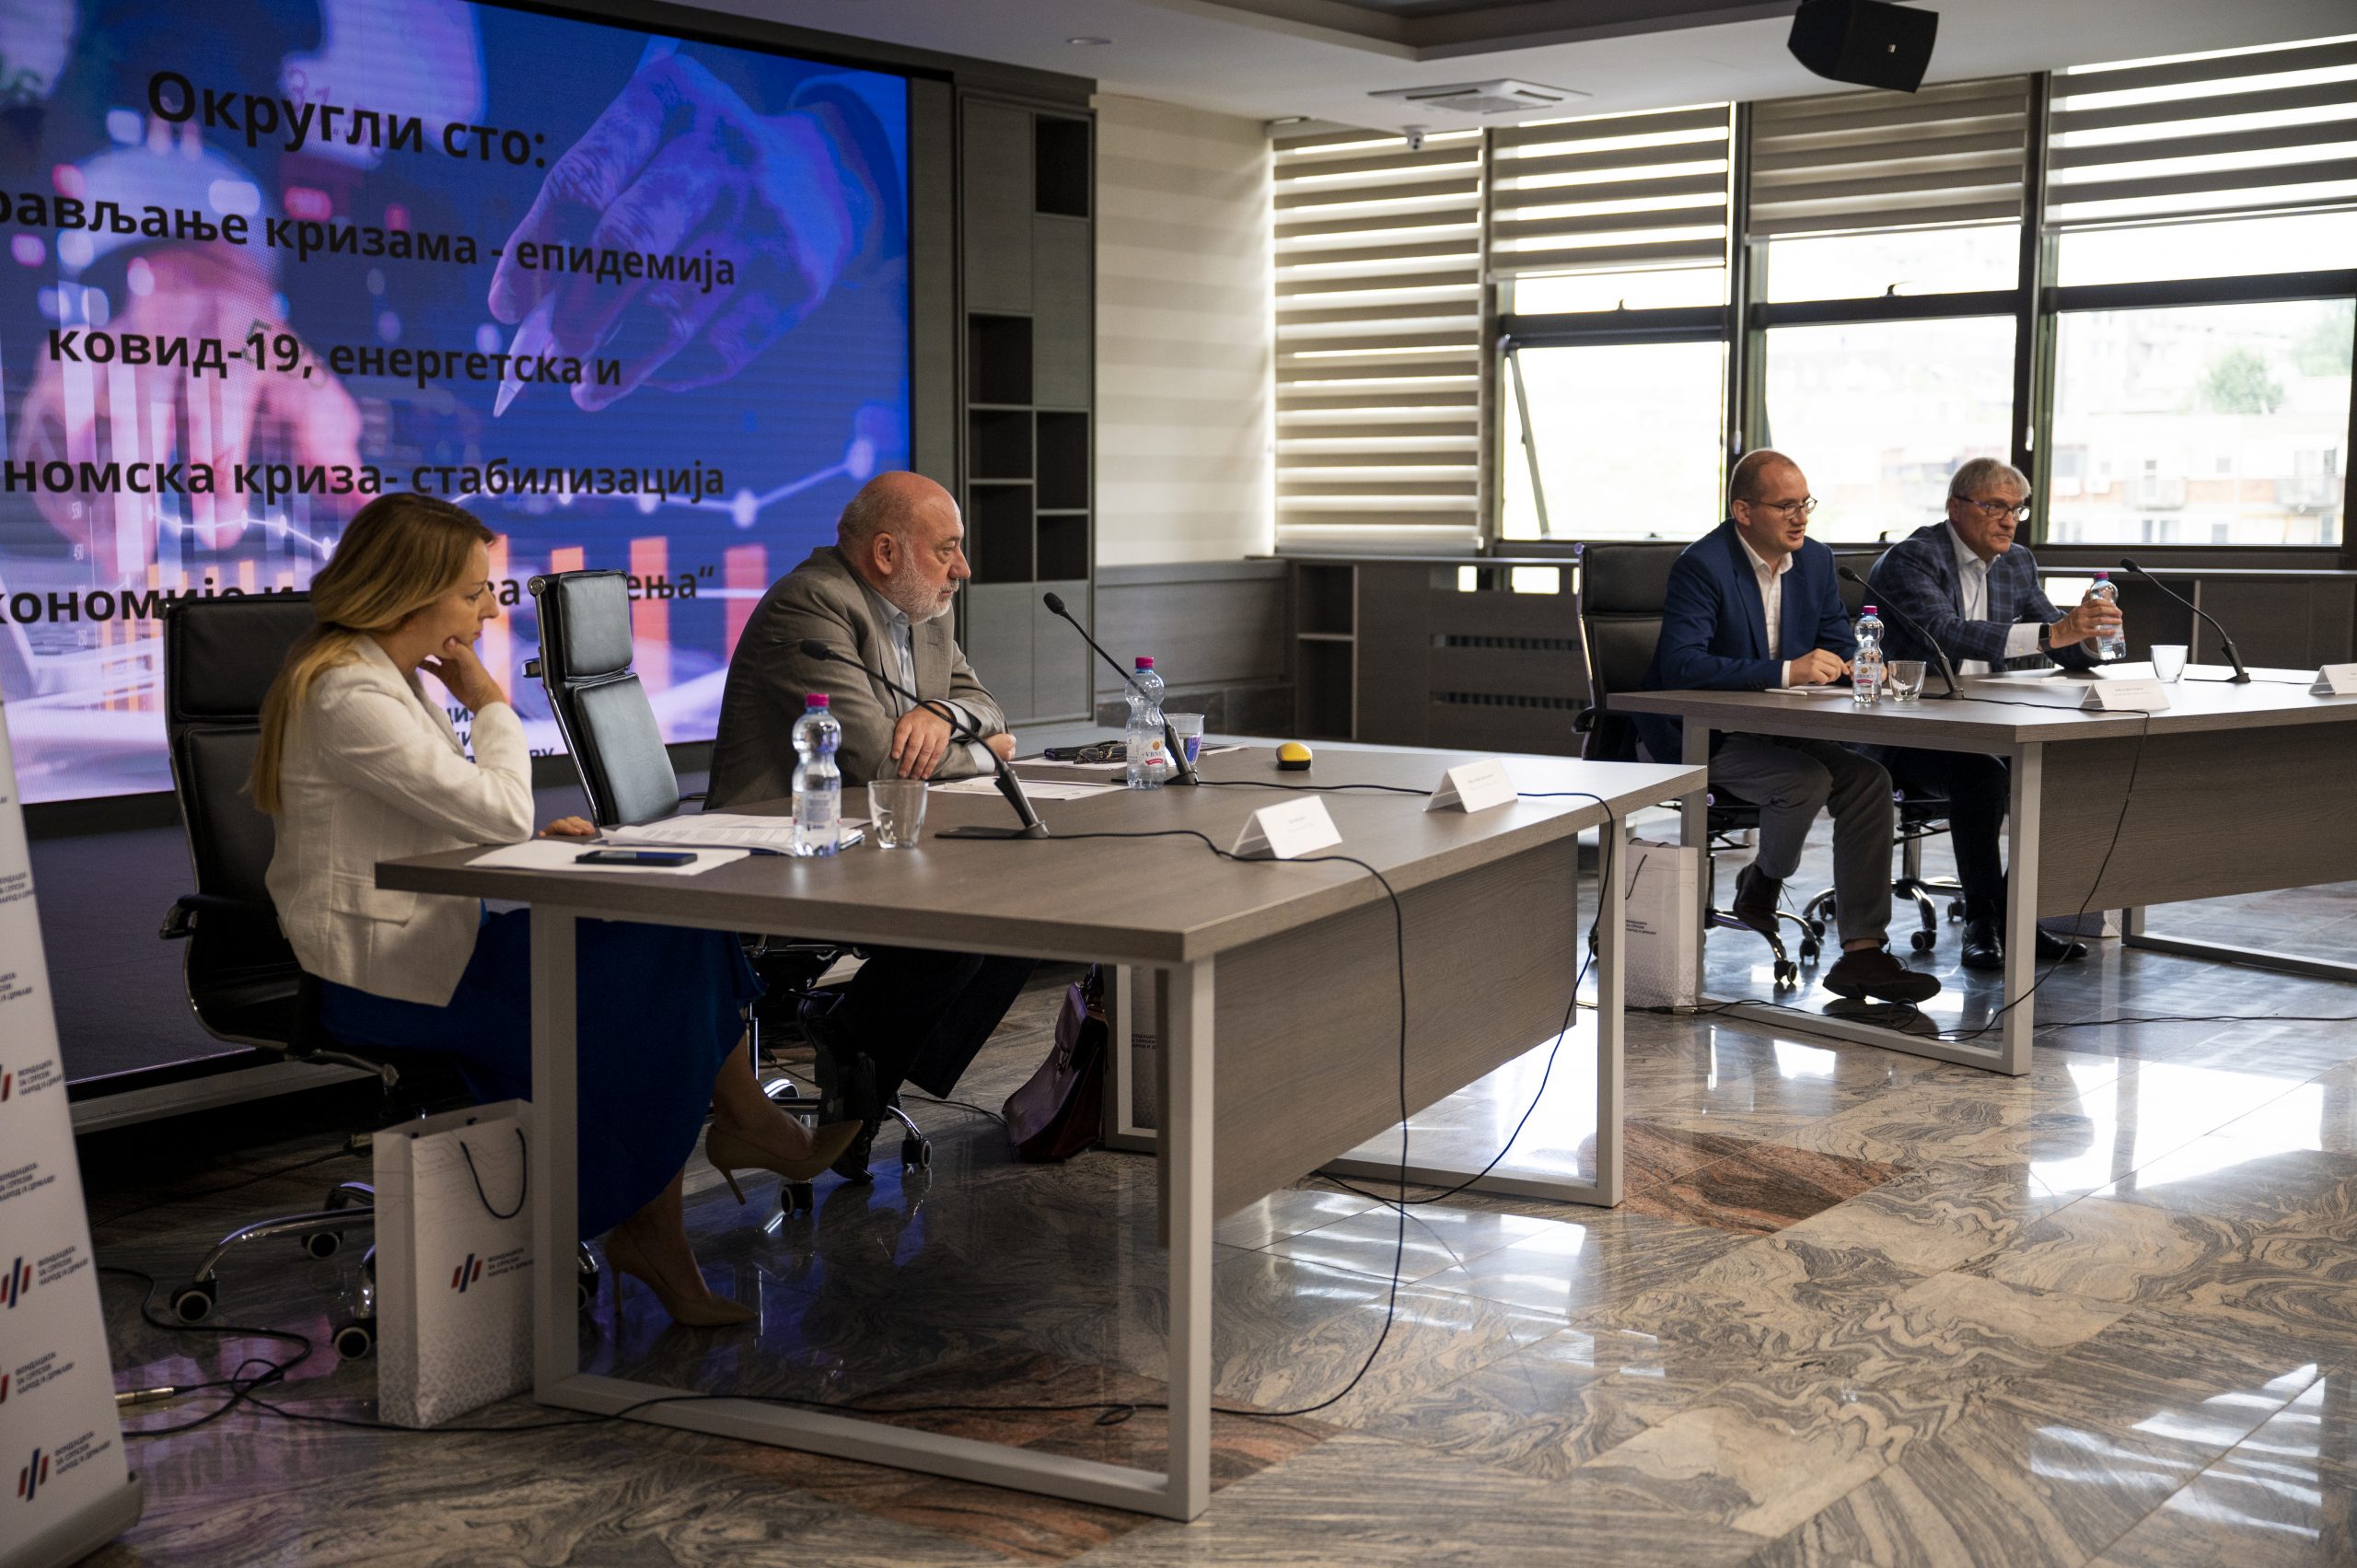 The roundtable: “Crisis management – covid-19 epidemic, energy and economic crisis – stabilisation of economy and sustainable solutions”